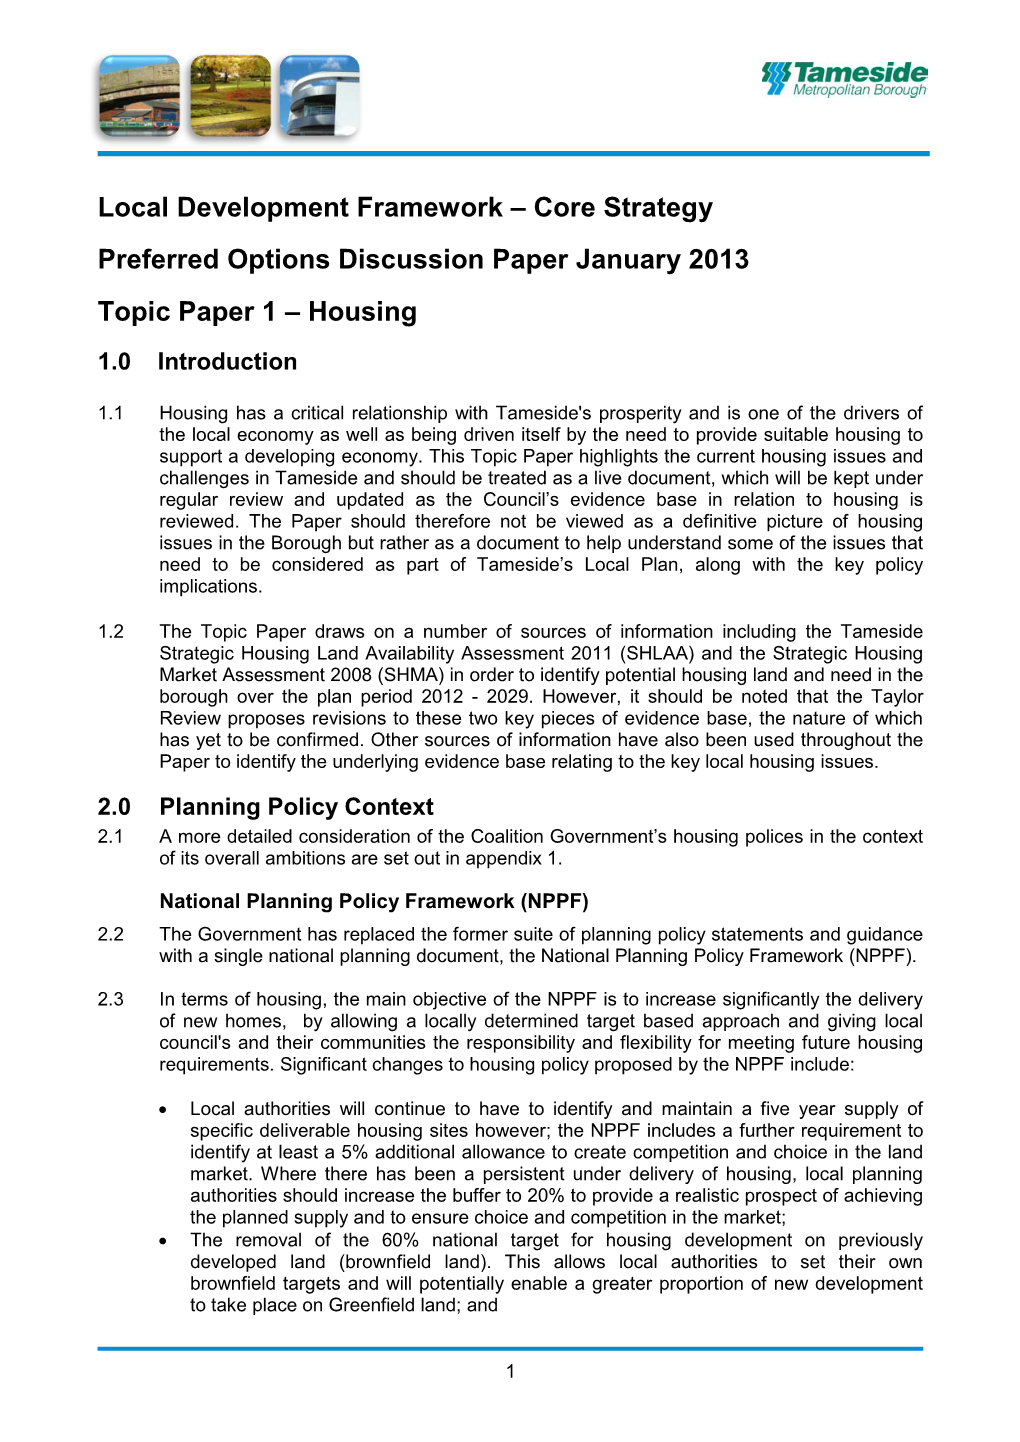 Local Development Framework – Core Strategy Preferred Options Discussion Paper January 2013 Topic Paper 1 – Housing 1.0 Introduction